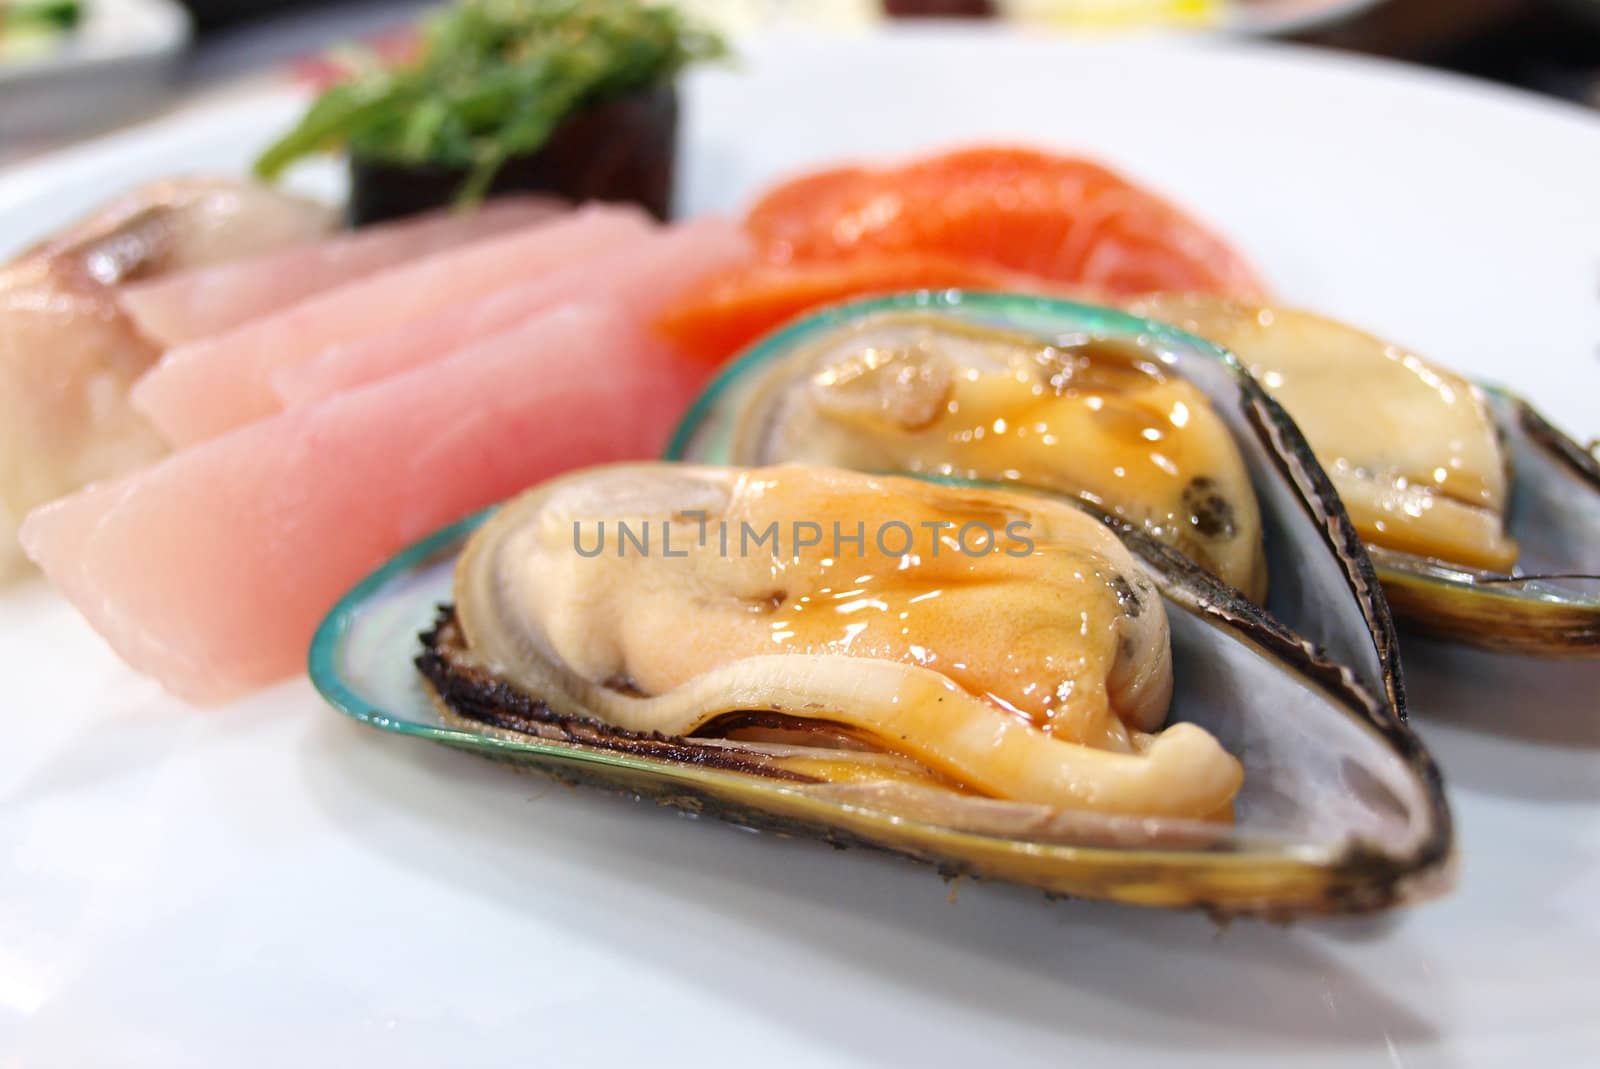 Japan food style - Mussel with sauce